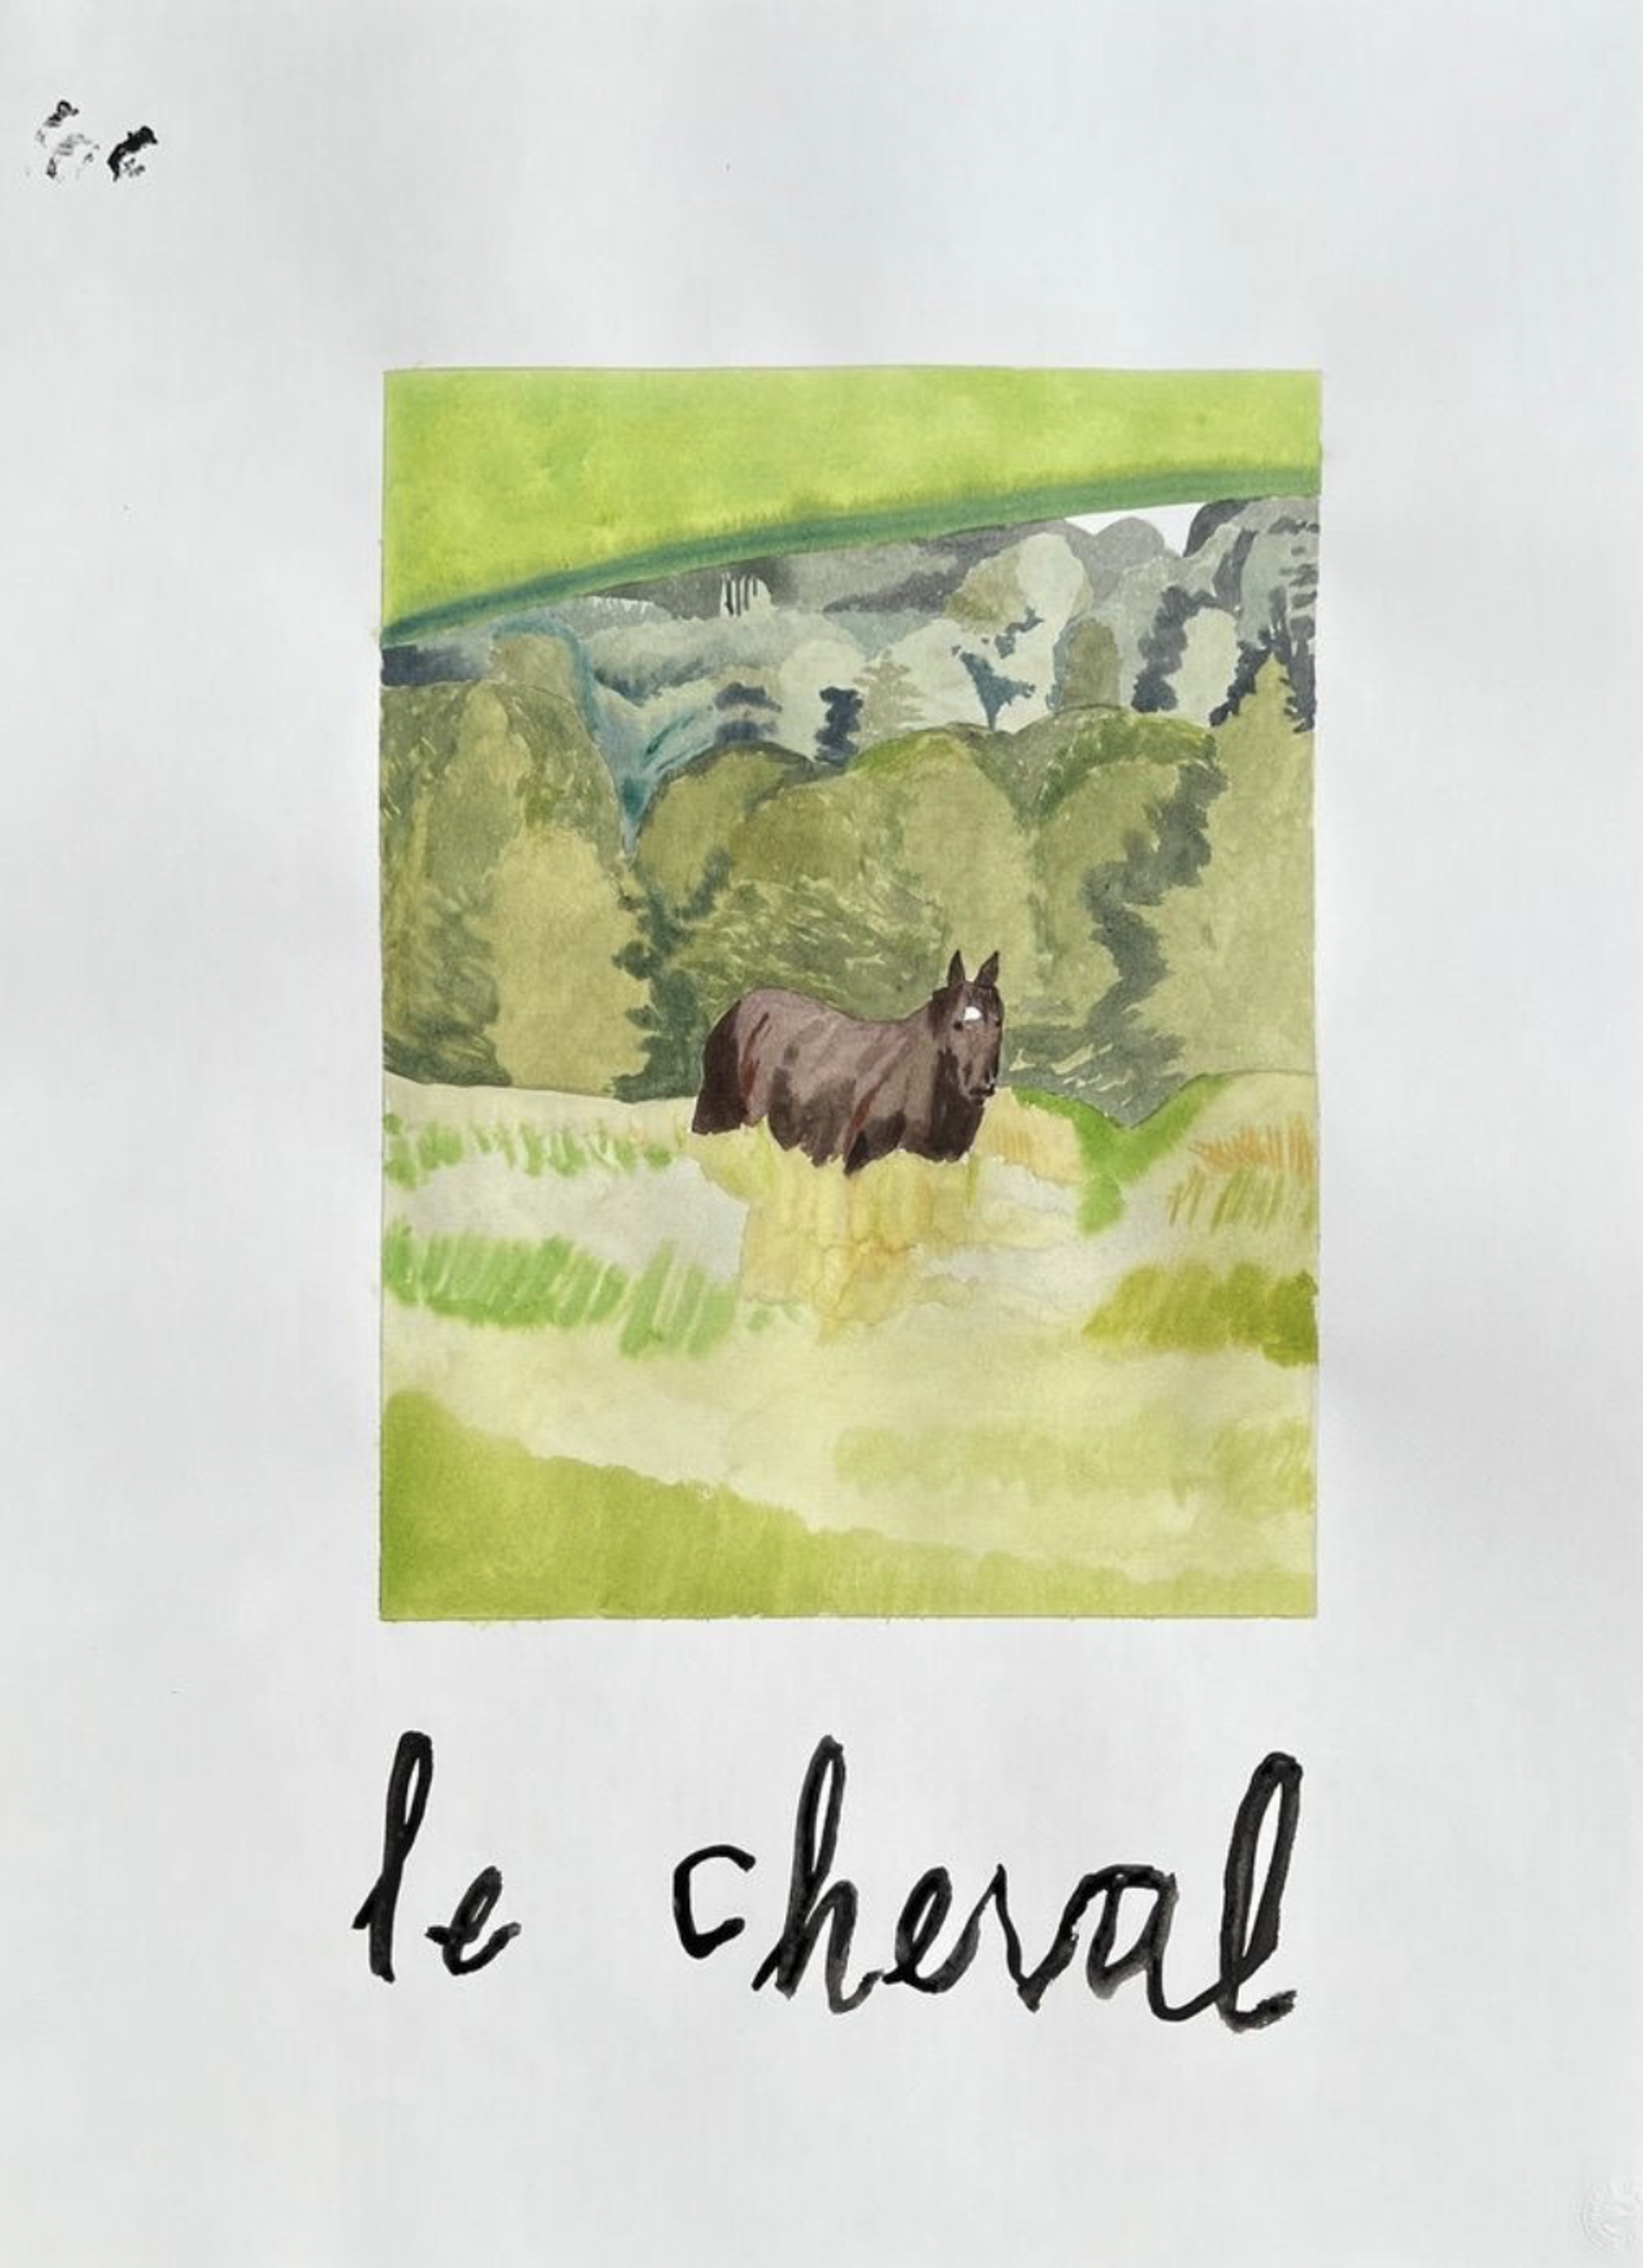 Flashcard (Le Cheval) by Bradley Kerl